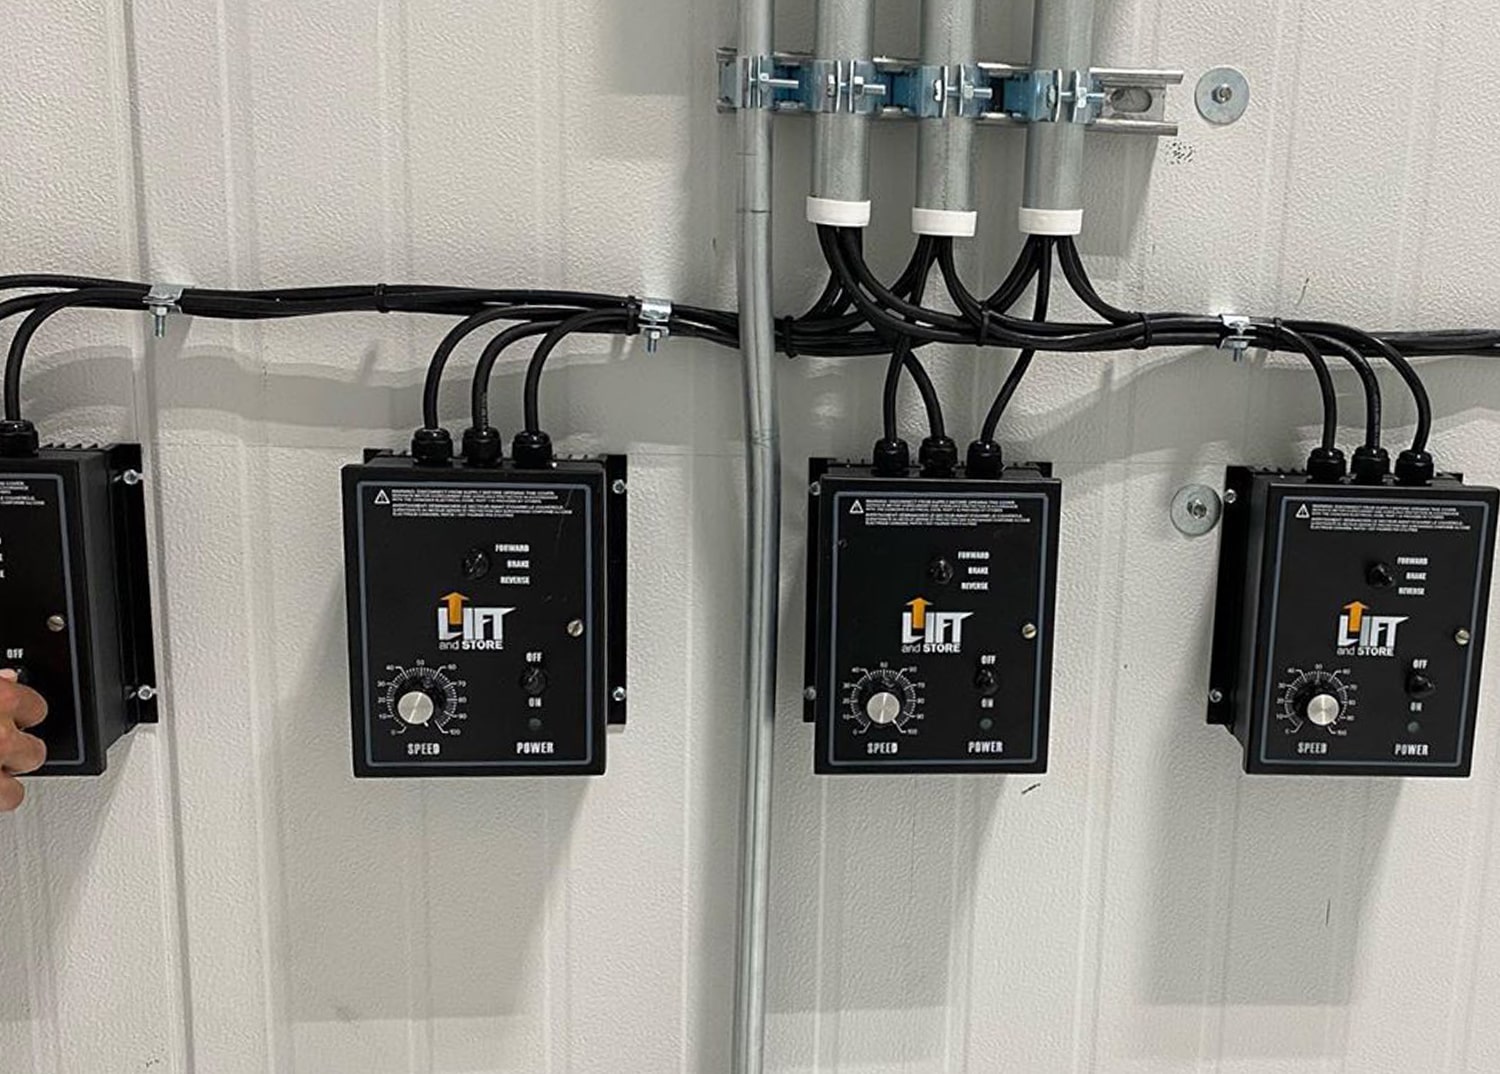 control panels used for automating operations in a cannabis cultivation business